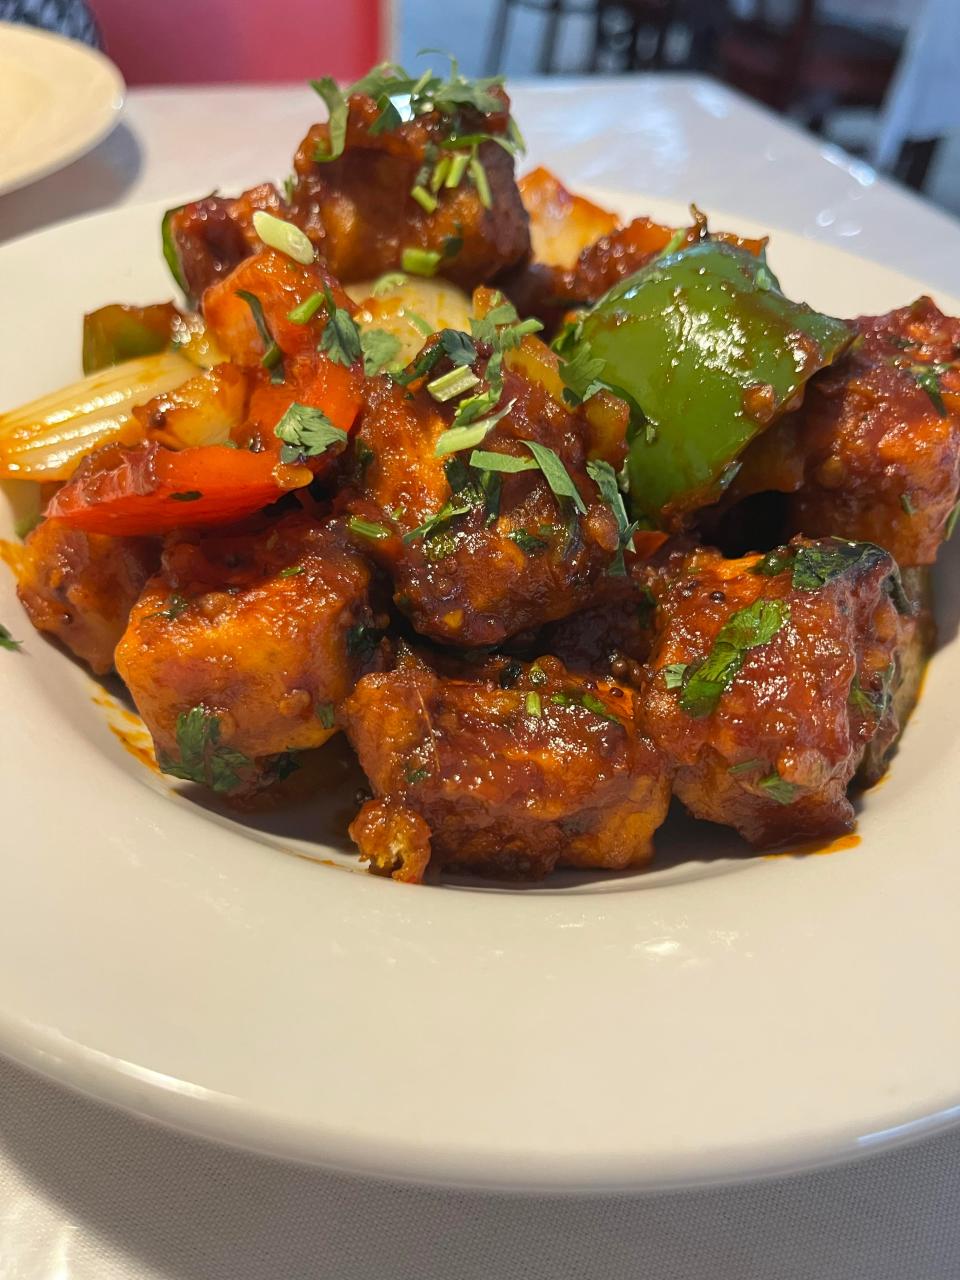 Chili paneer is a gluten-free vegetarian appetizer made of batter-fried Indian cheese tossed in sweet and spicy chili sauce, topped with onions and bell peppers.